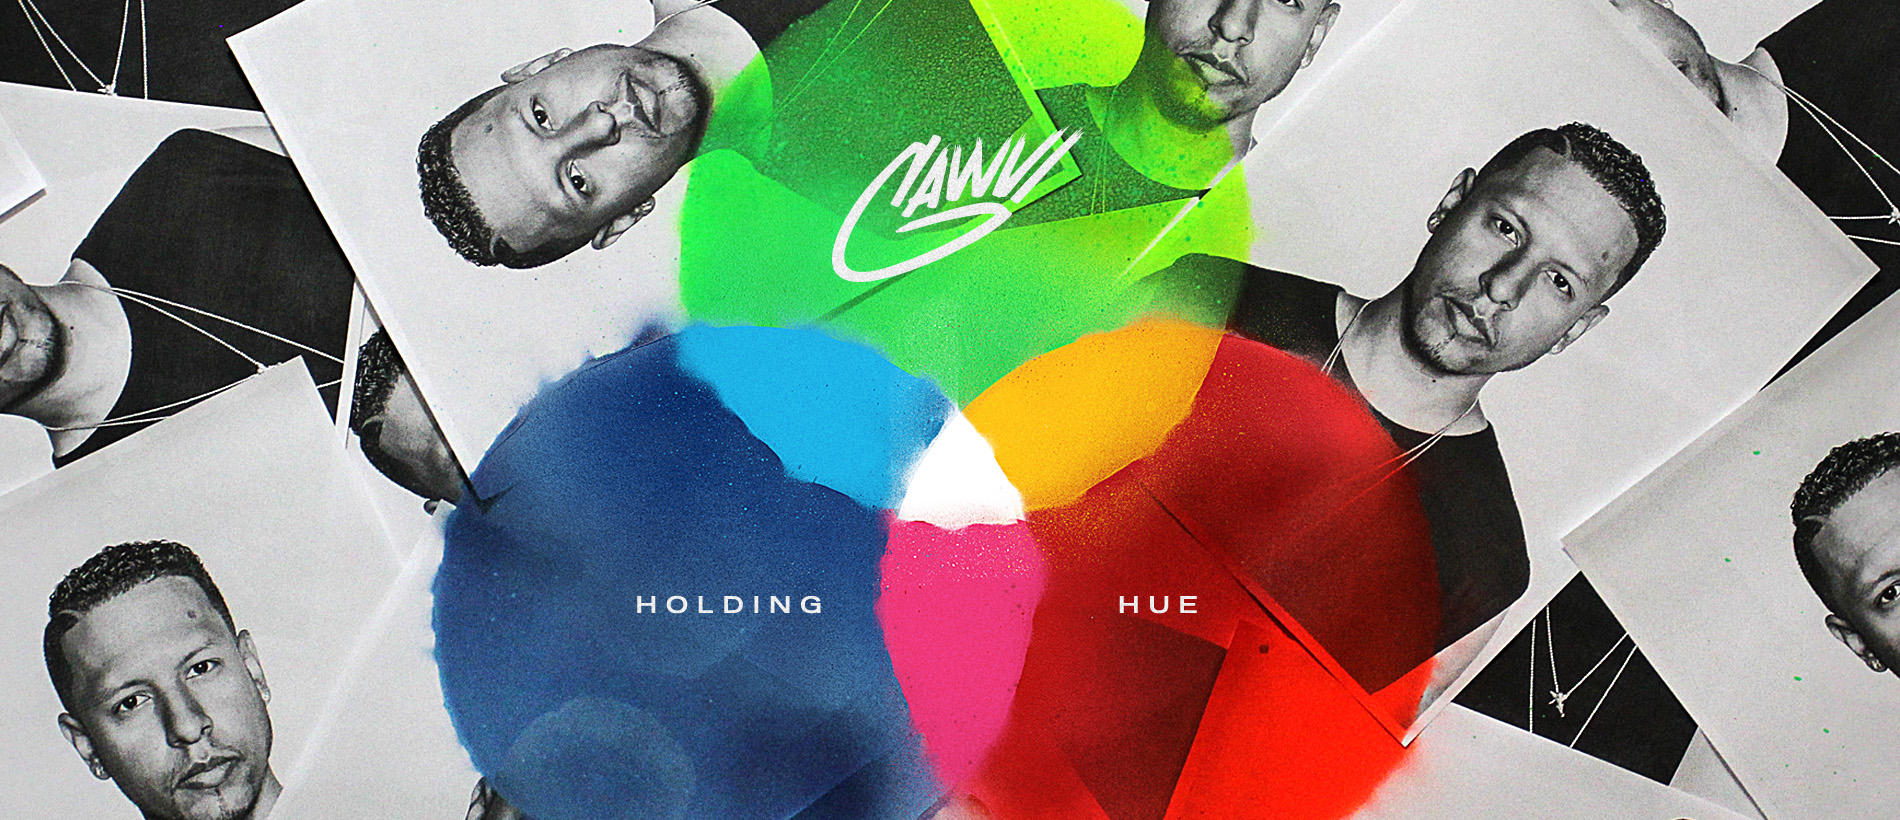 GAWVI X HOLDING HUE X OUT NOW